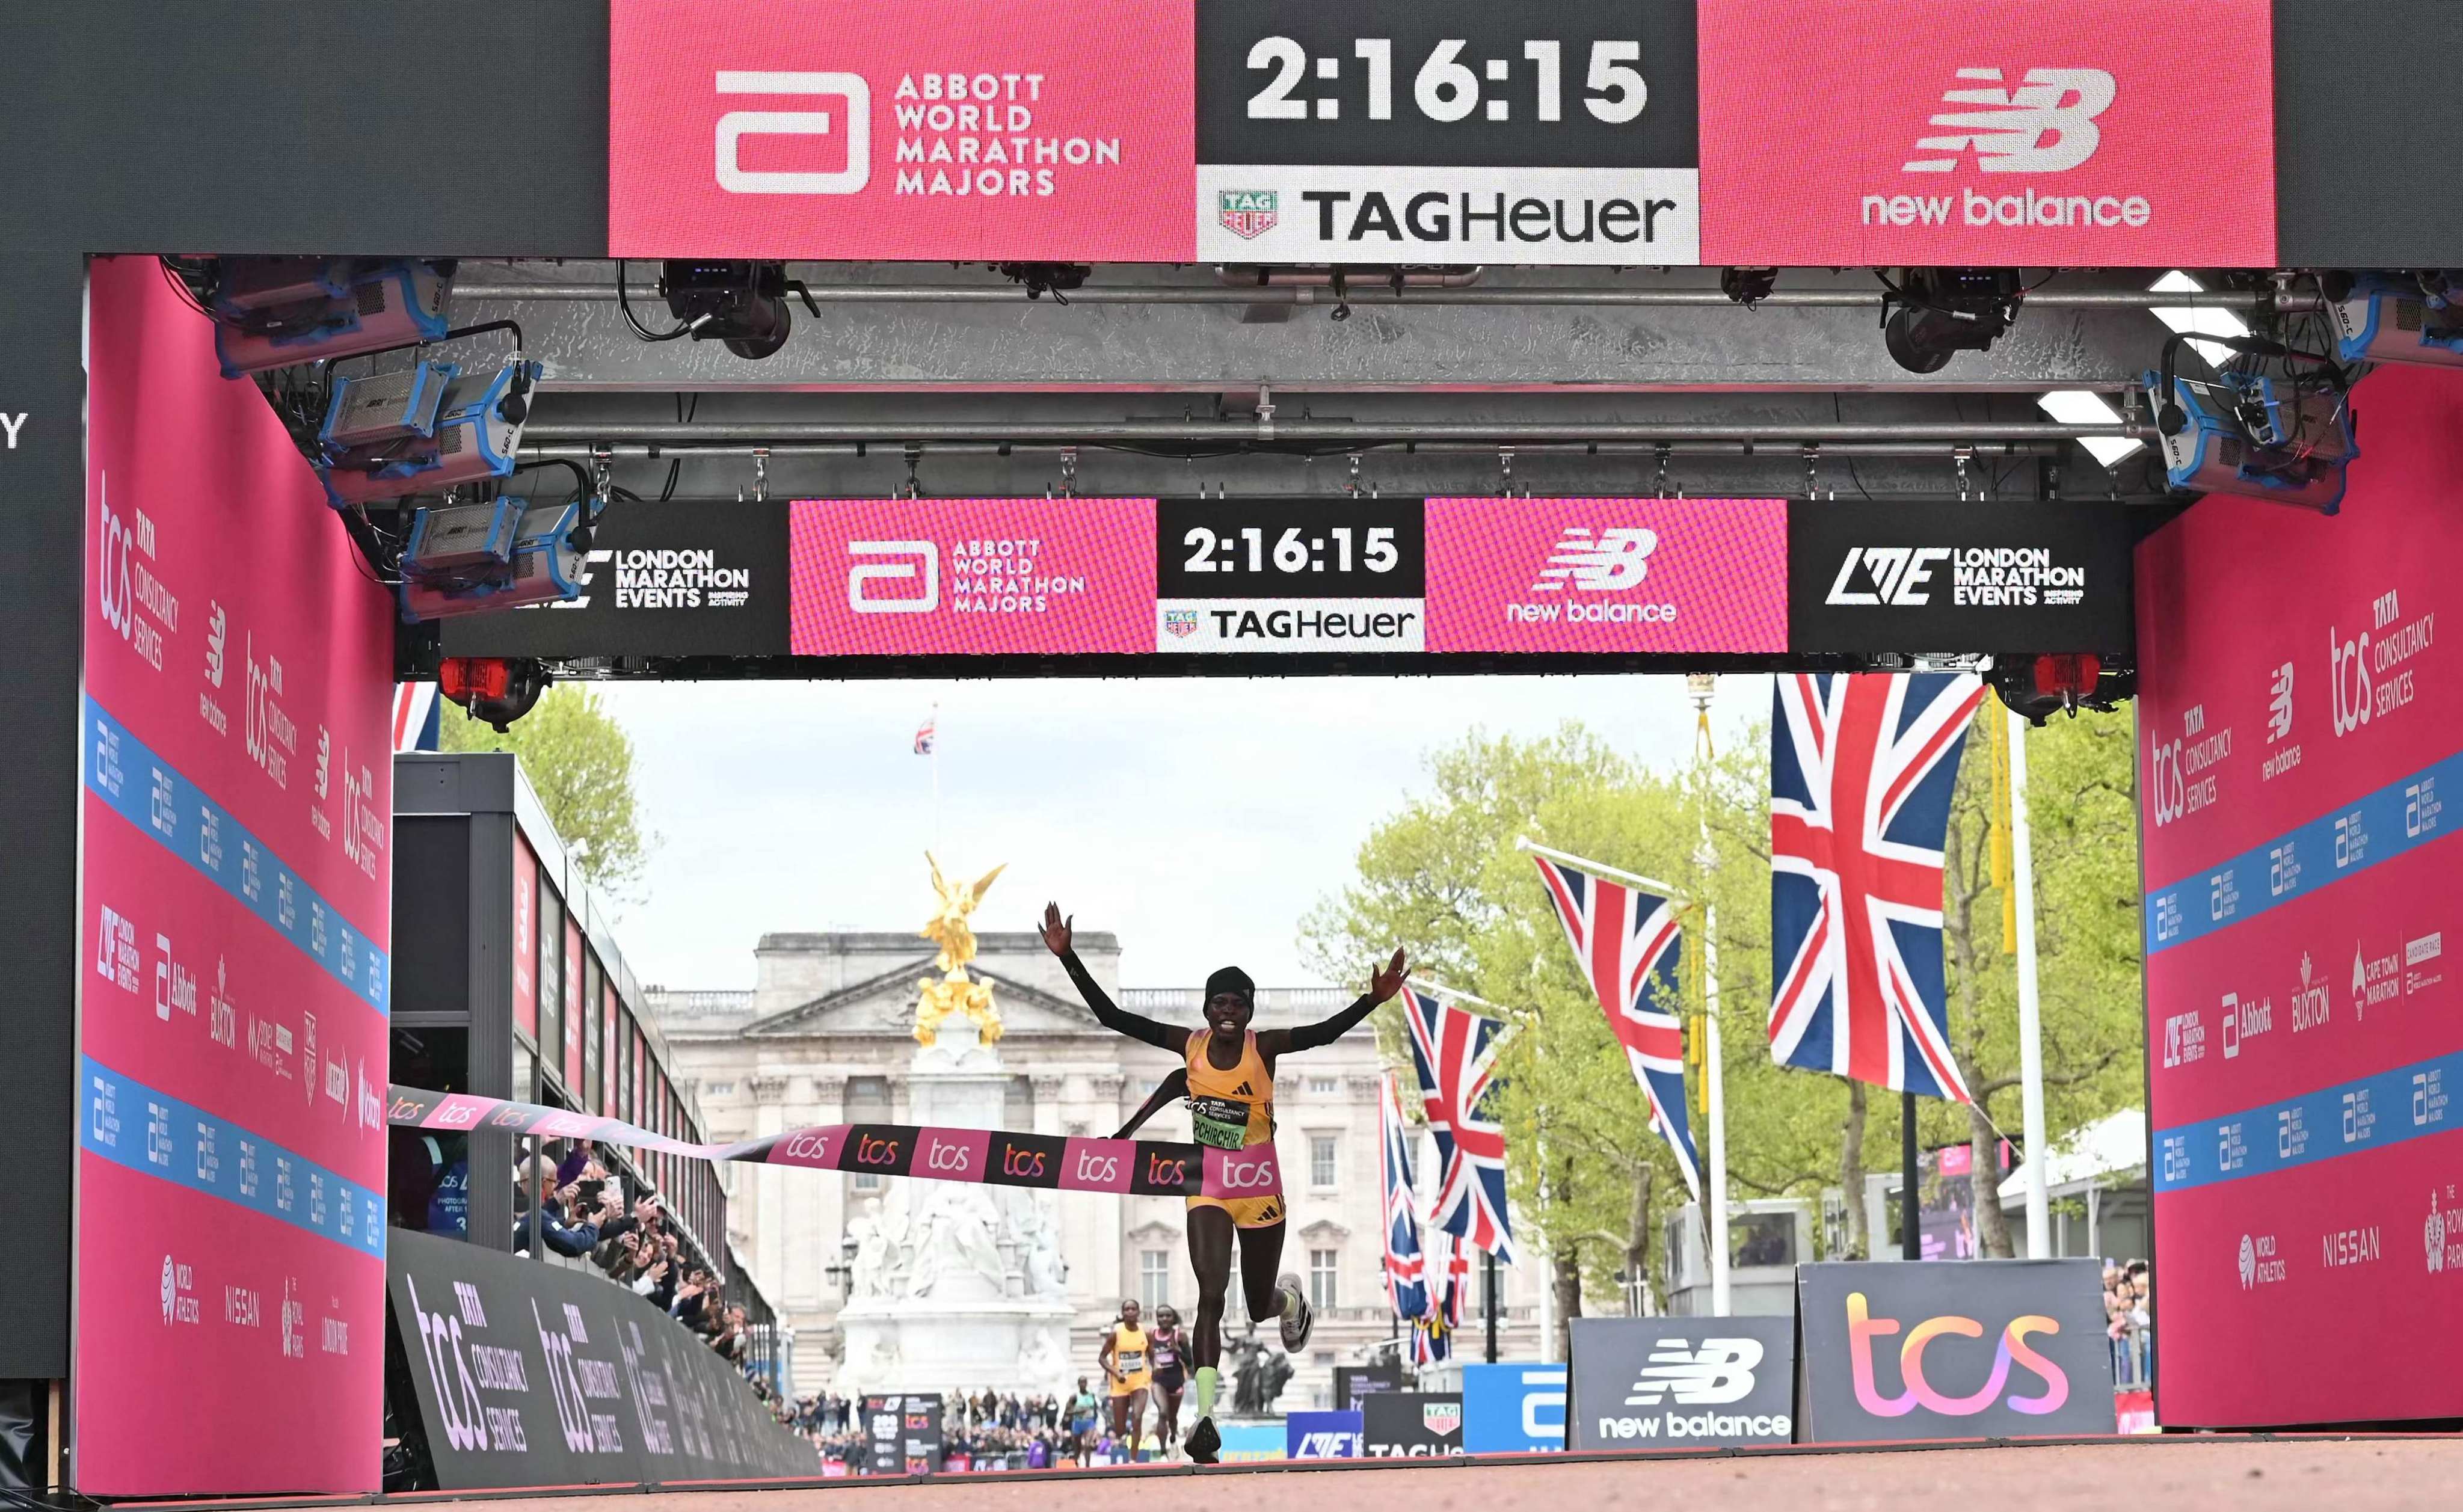 Kenya’s Peres Jepchirchir crosses the line to win the women’s race in a world record time. Photo: AFP